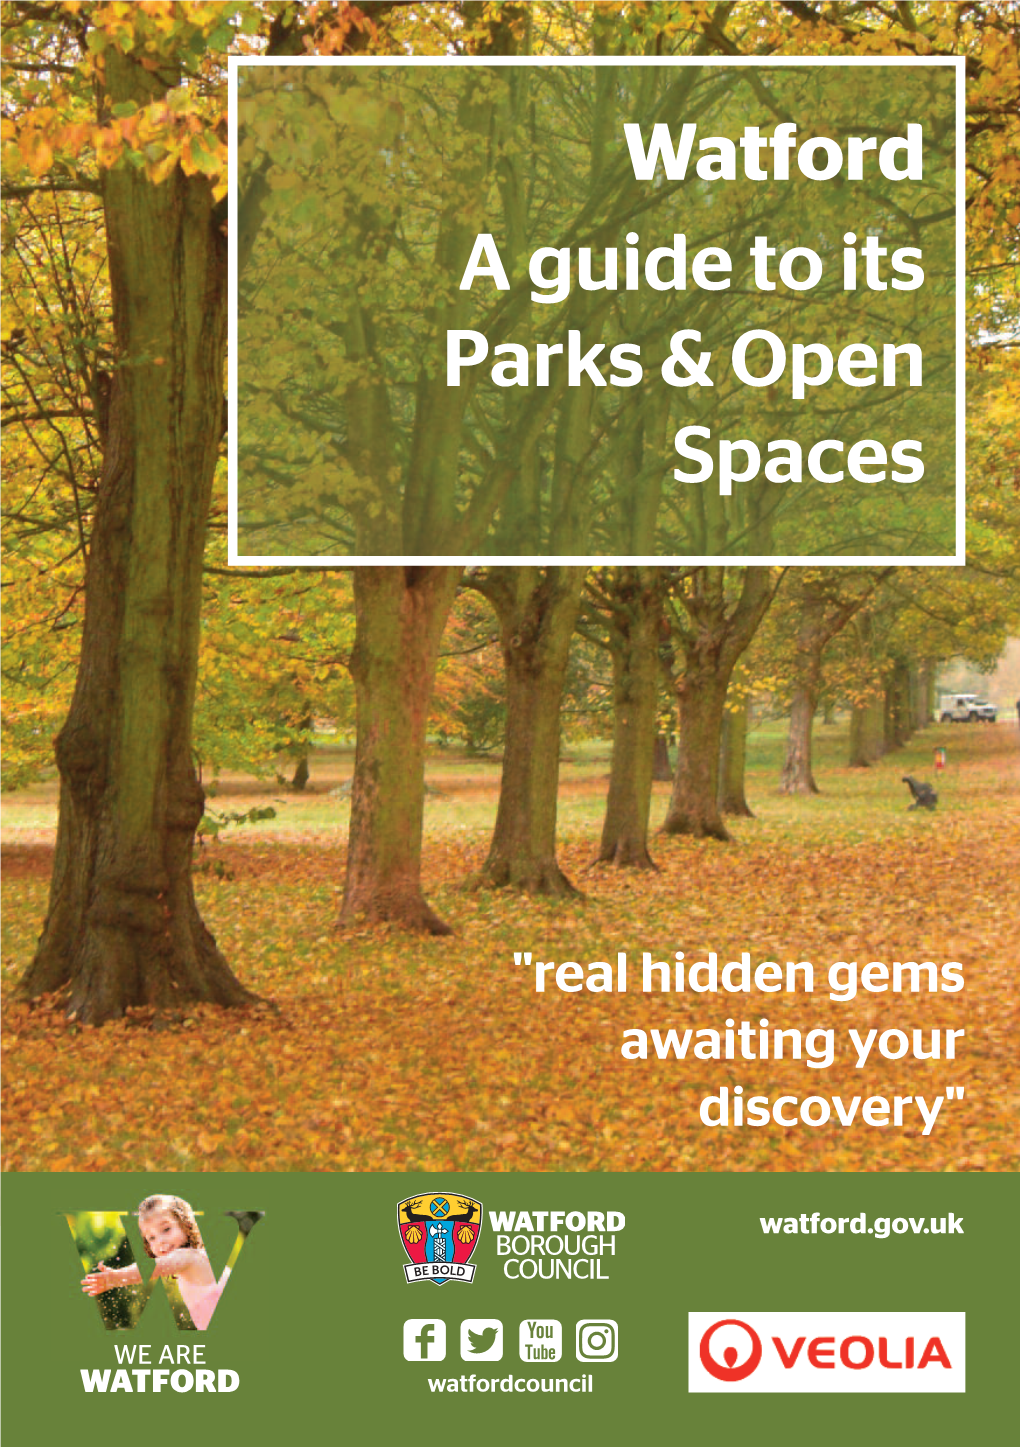 Watford. a Guide to Its Parks & Open Spaces